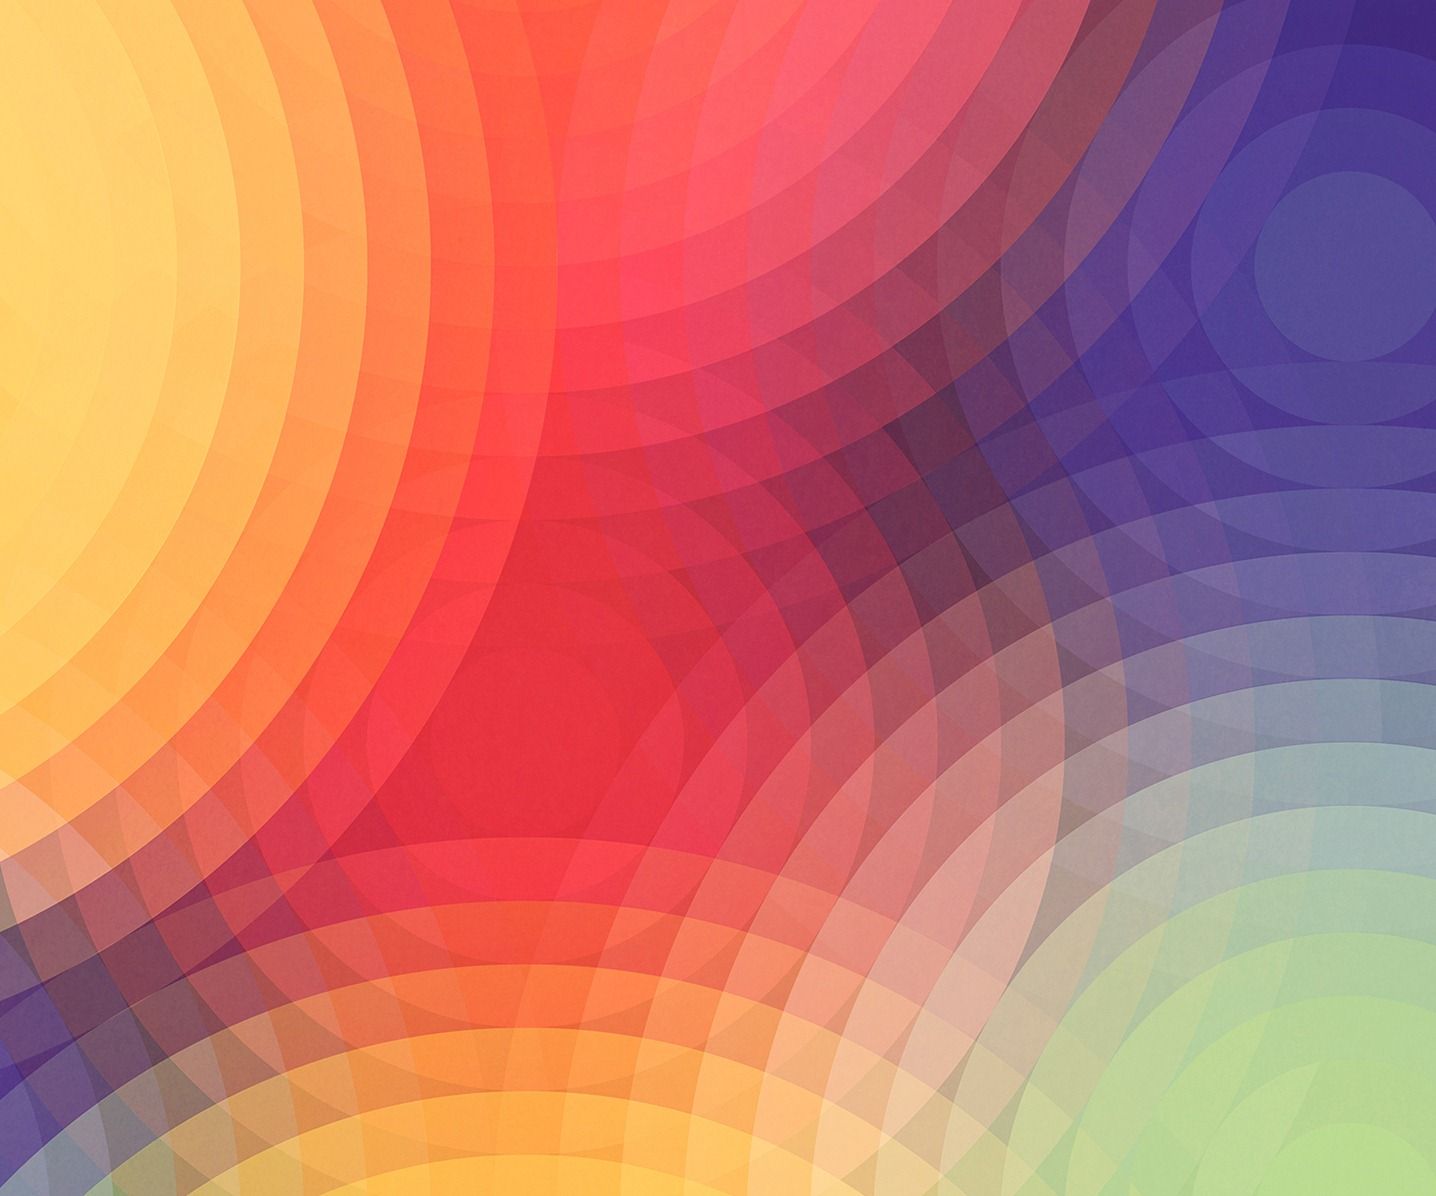 Android 4.2 Wallpapers now available for download as well as full